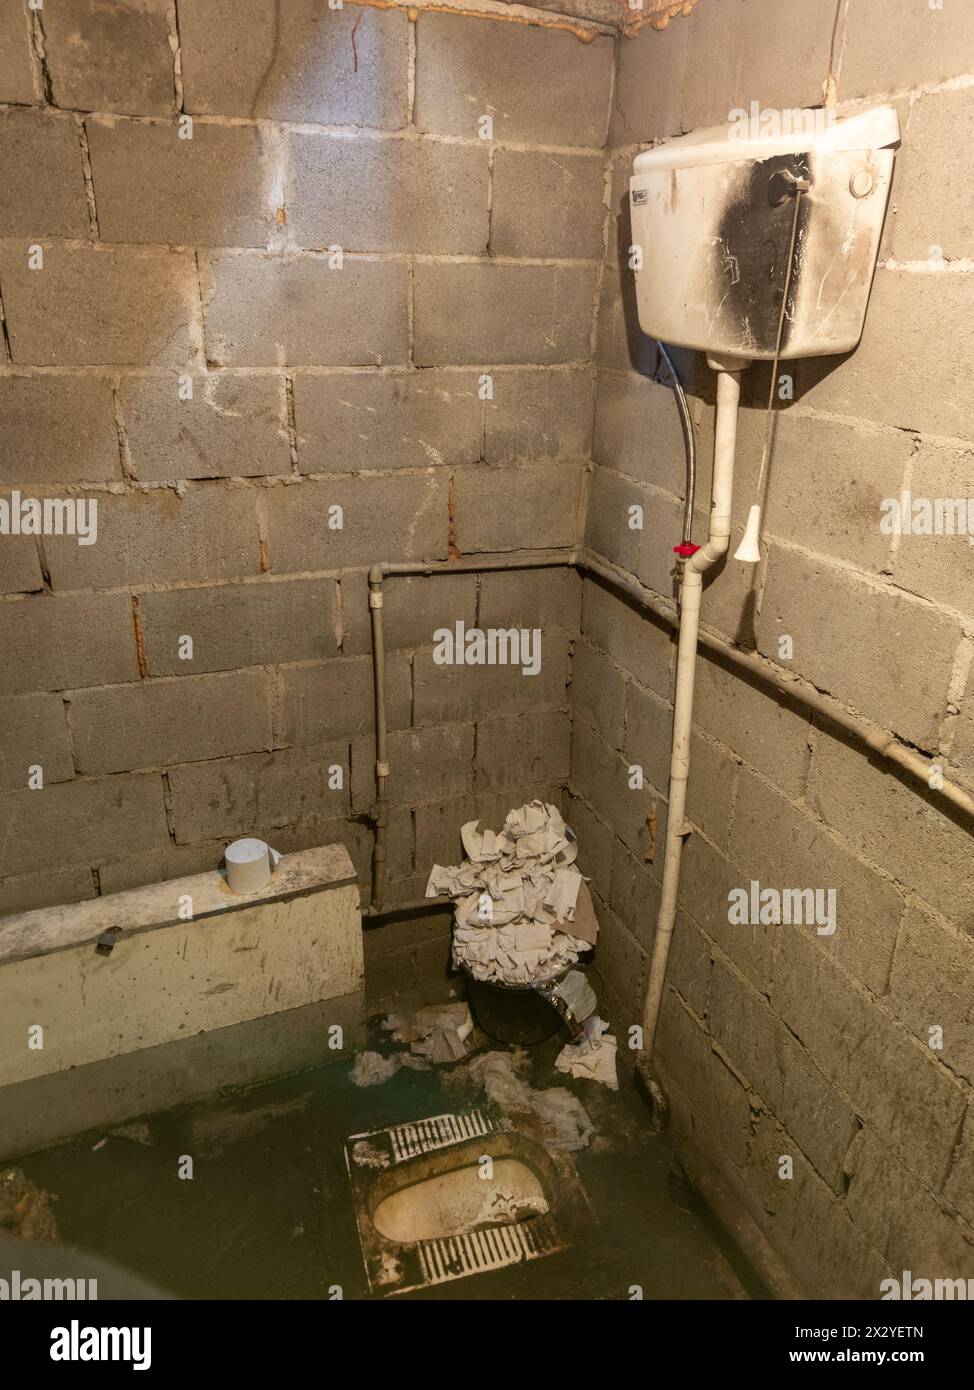 Dirty toilet room with pile of used toilet paper in the corner, uncoated concrete flooring and cinder brick walls. Stock Photo